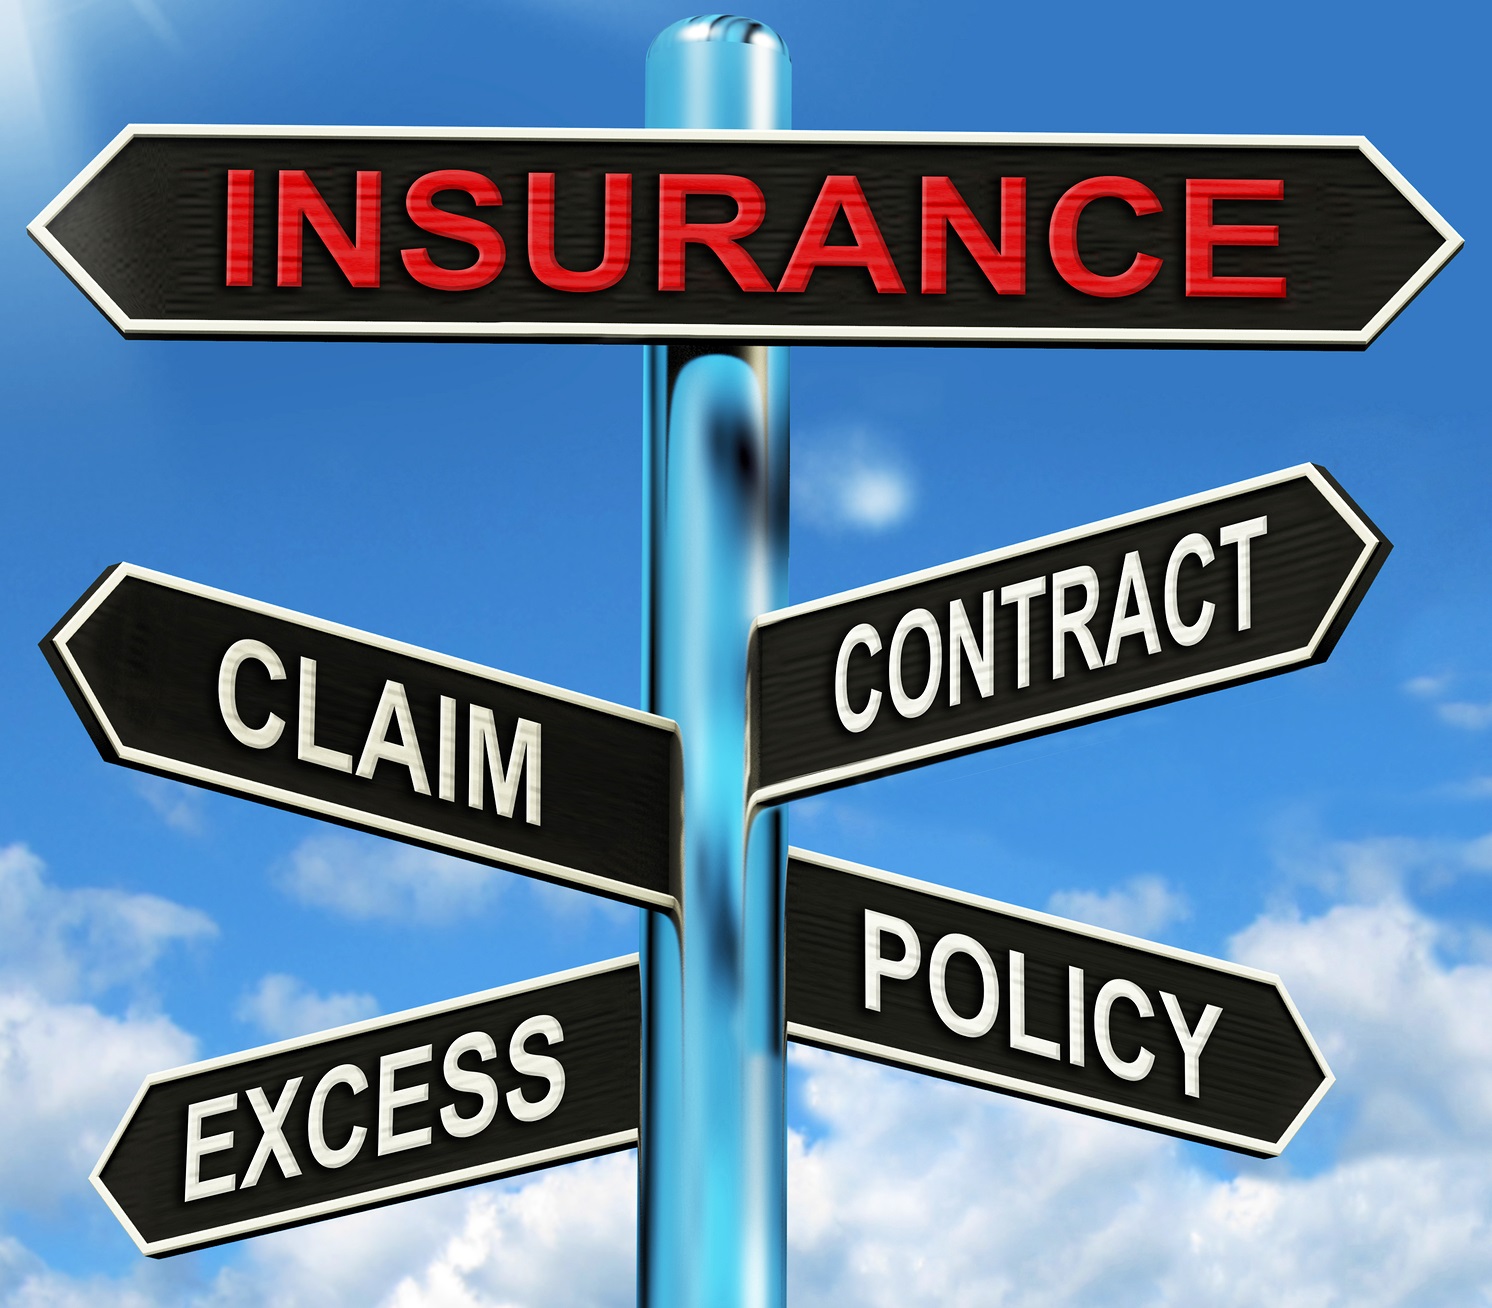 Insurance Or Assurance Concept Stock Images - Image: 35831724